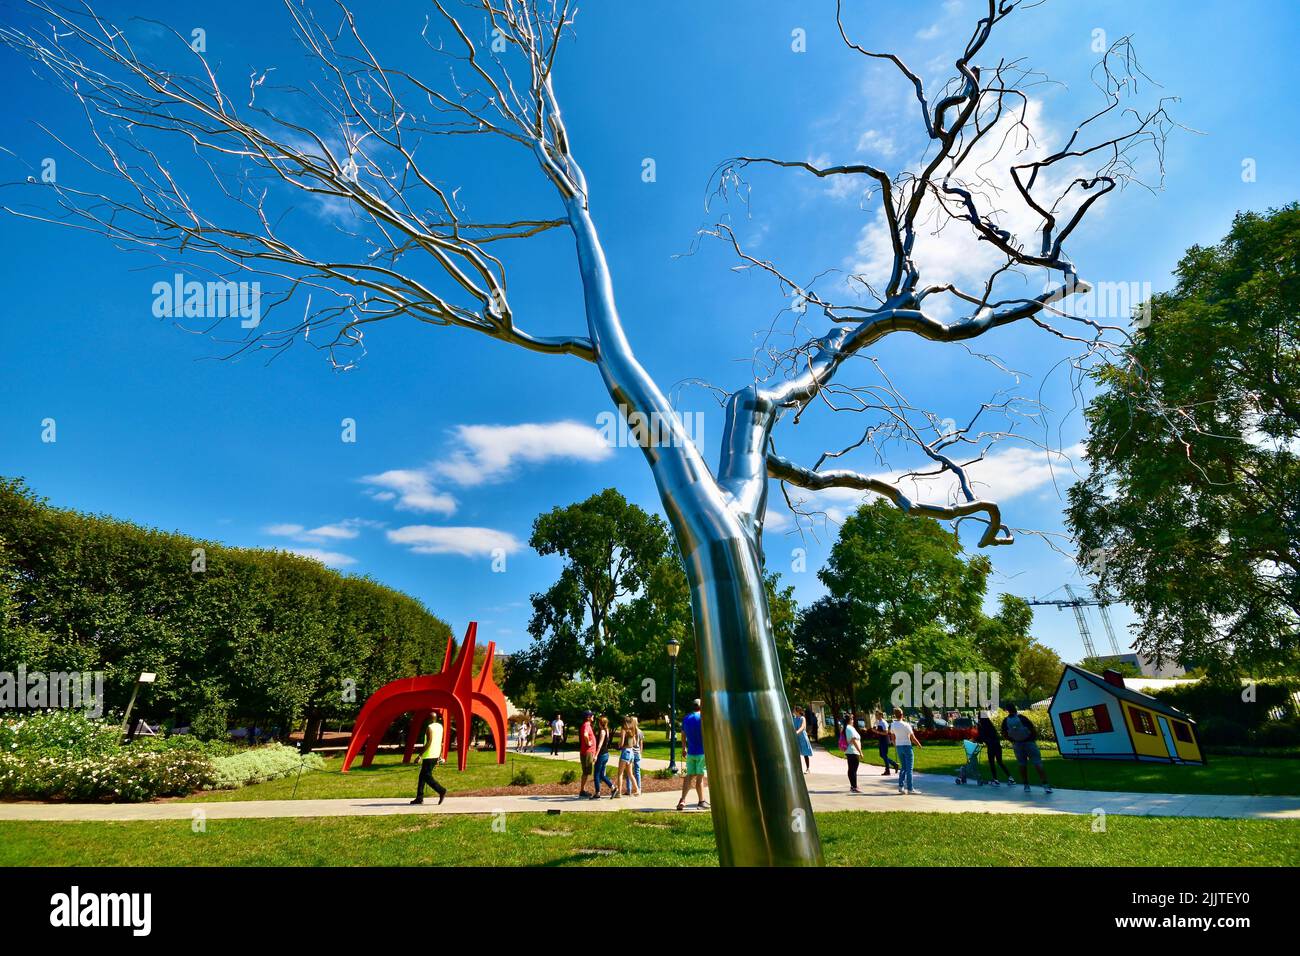 A beautiful shot of a tree sculpture in the National Art Gallery Garden in Washington DC Stock Photo